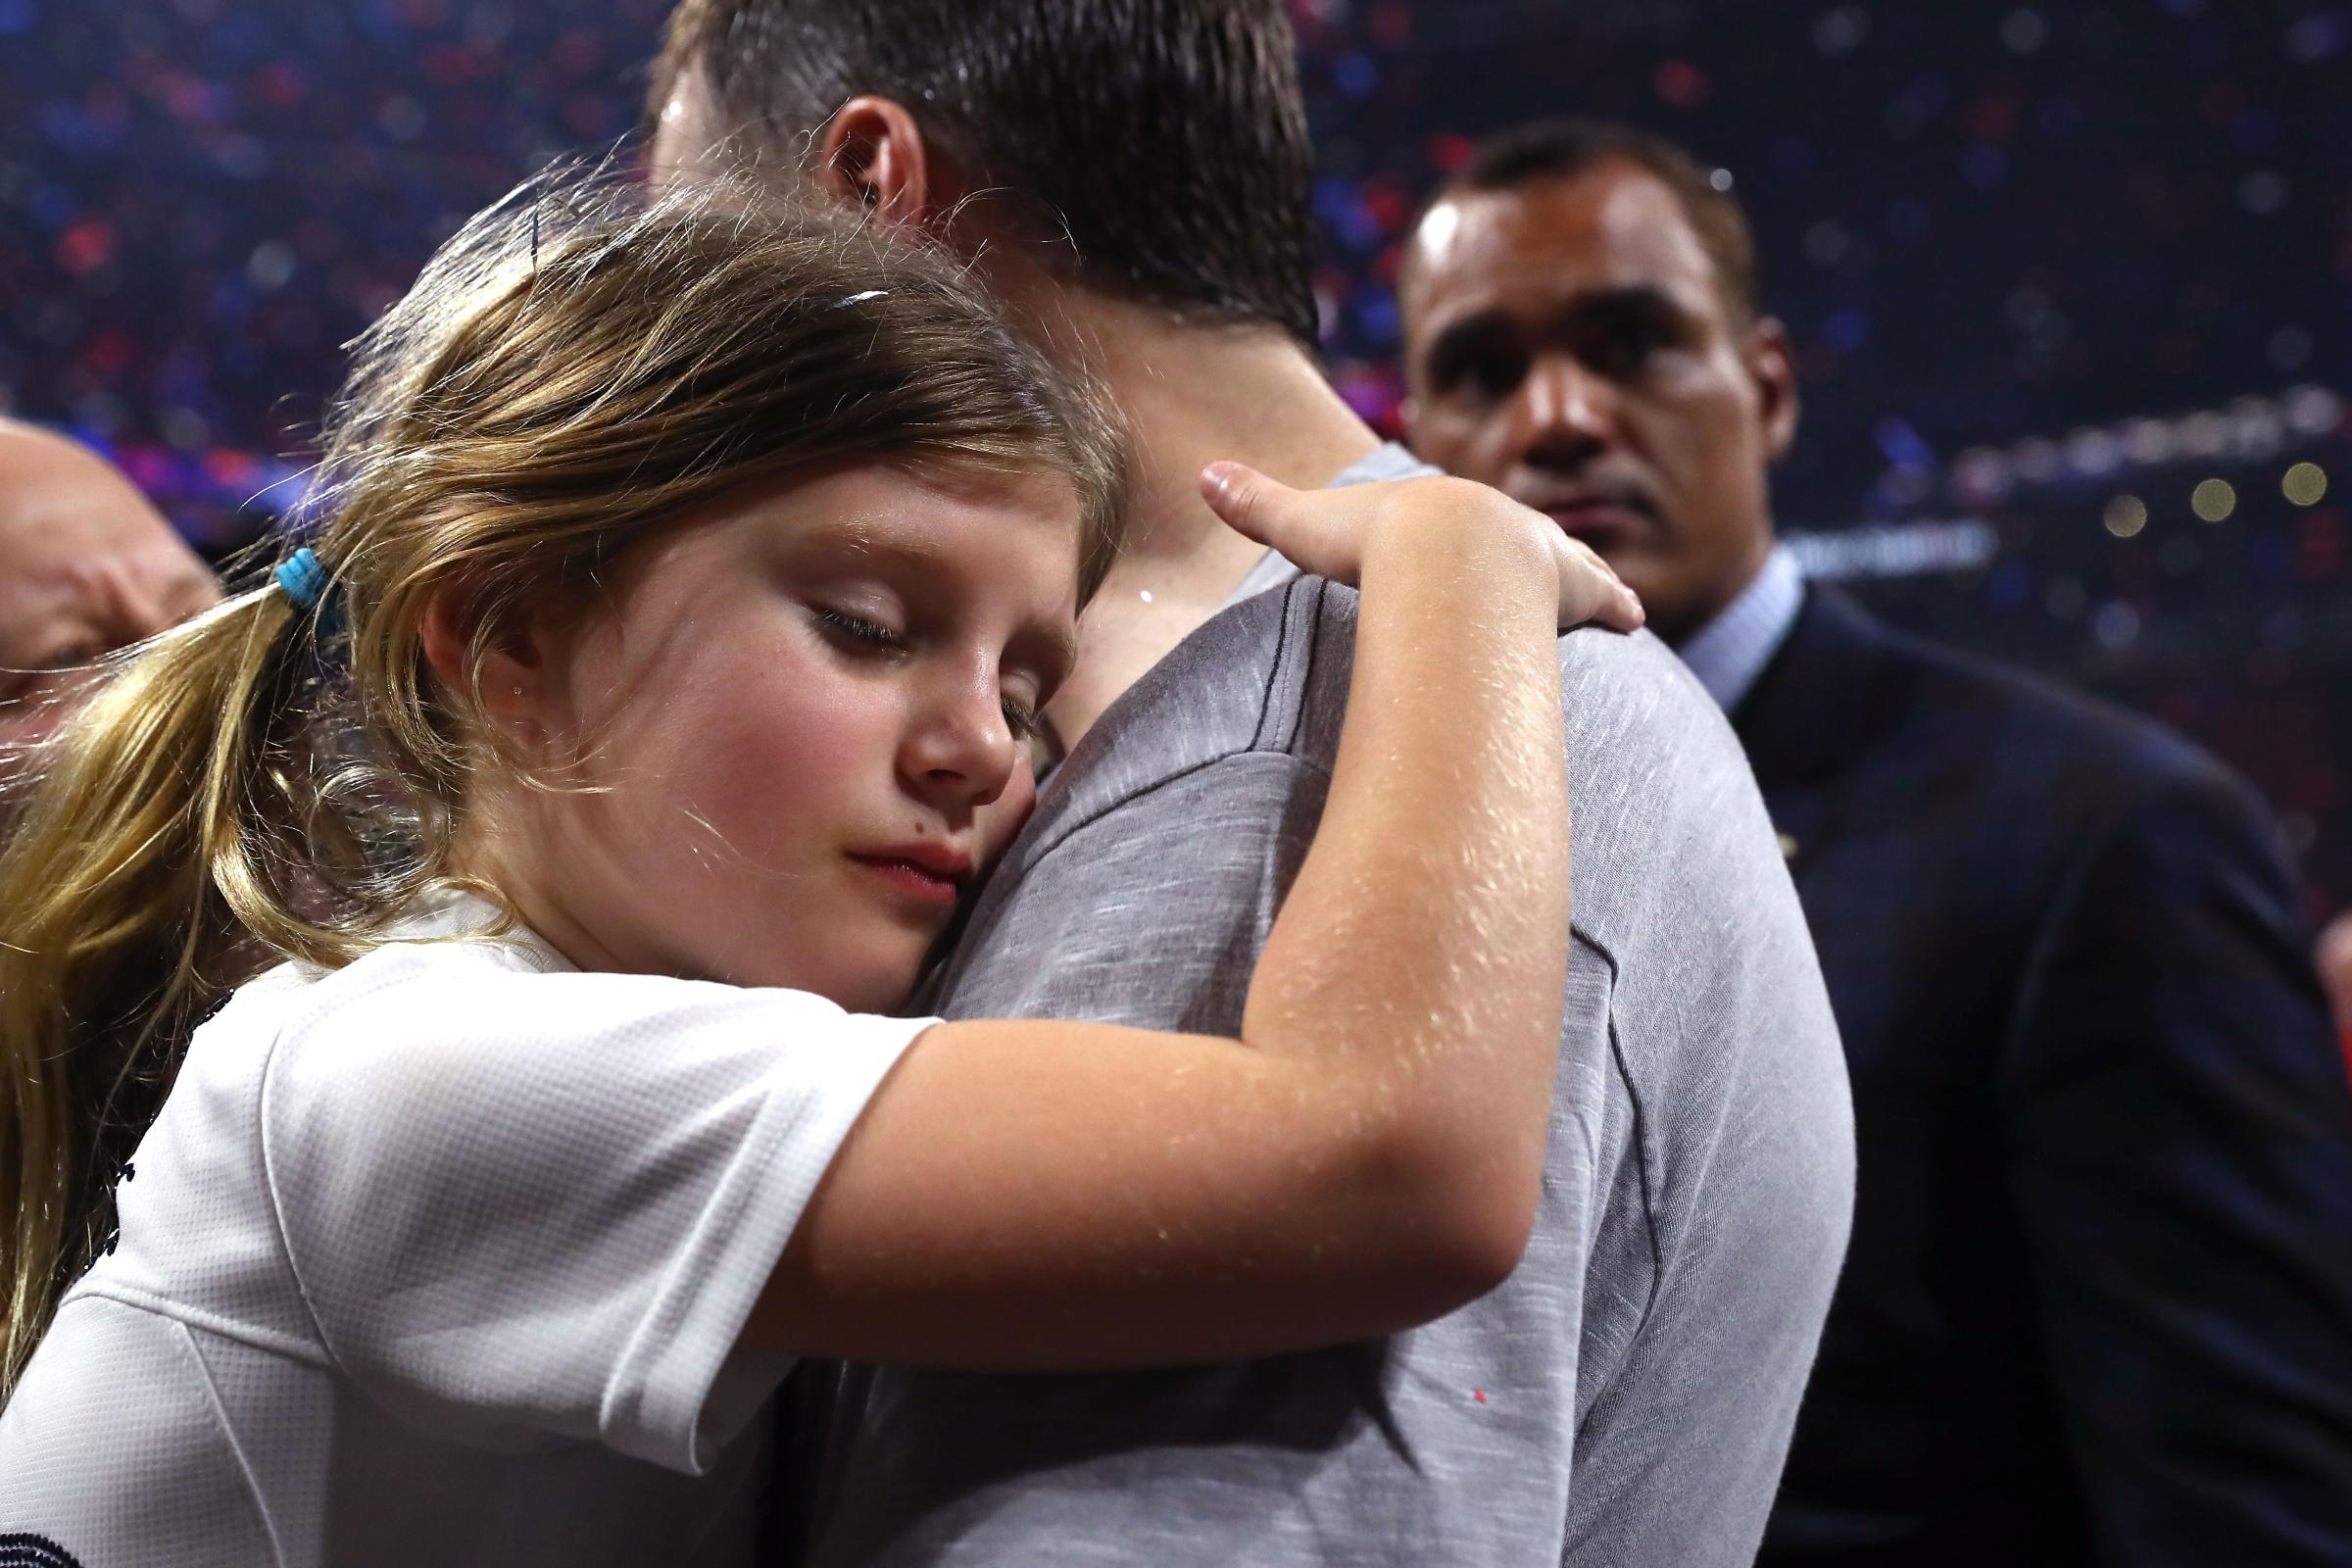 Tom Brady's daughter was a show stealer